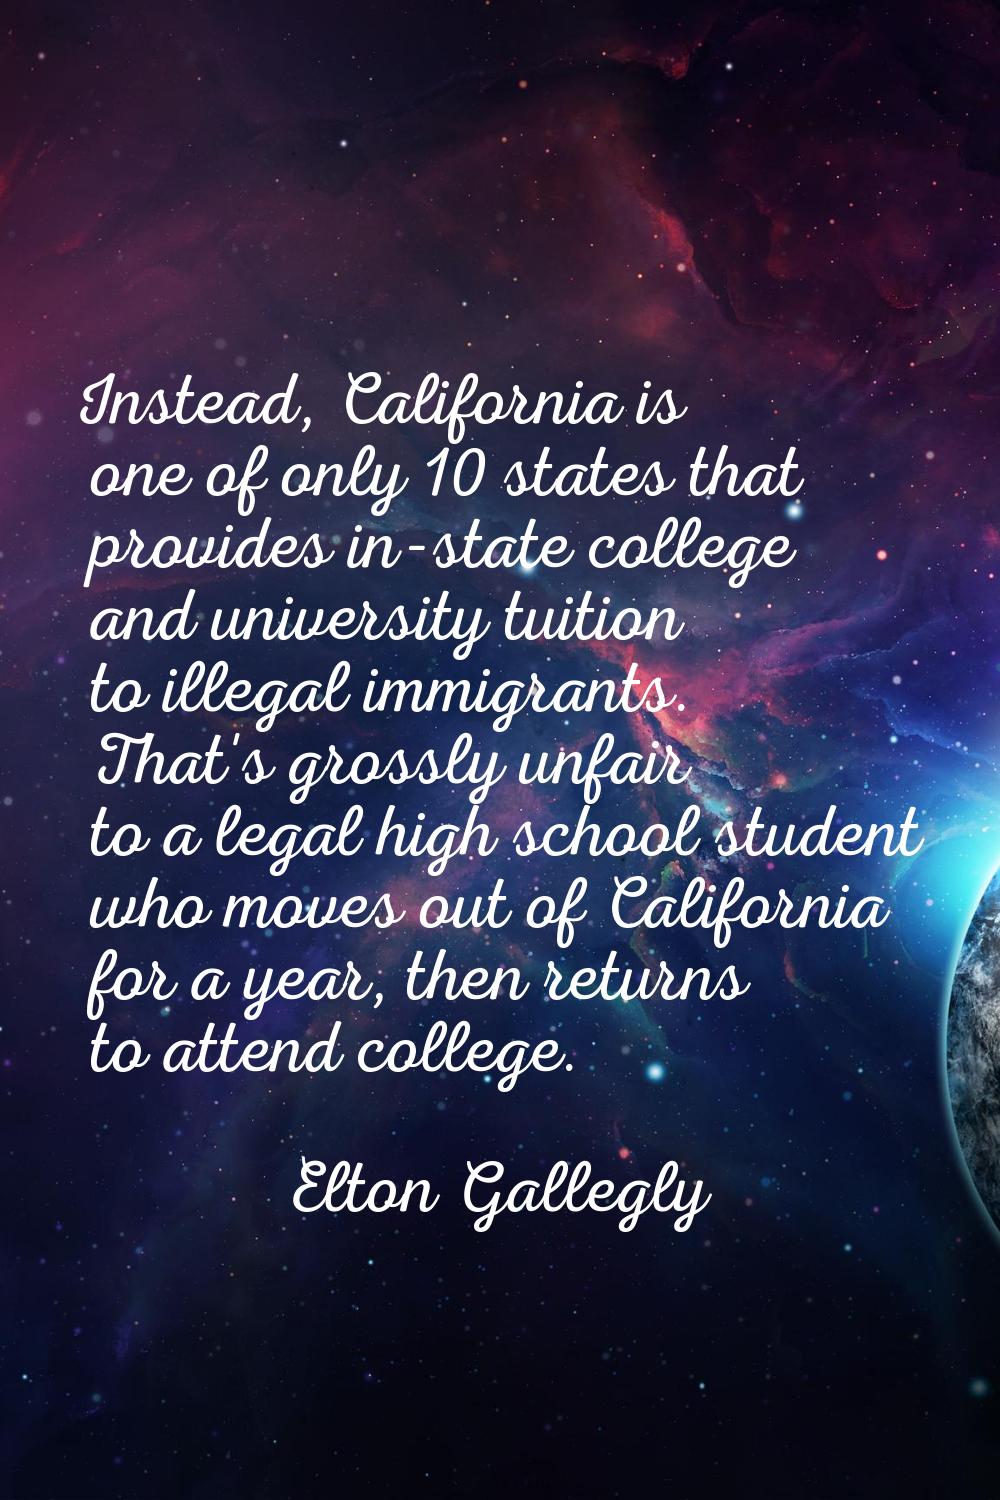 Instead, California is one of only 10 states that provides in-state college and university tuition 